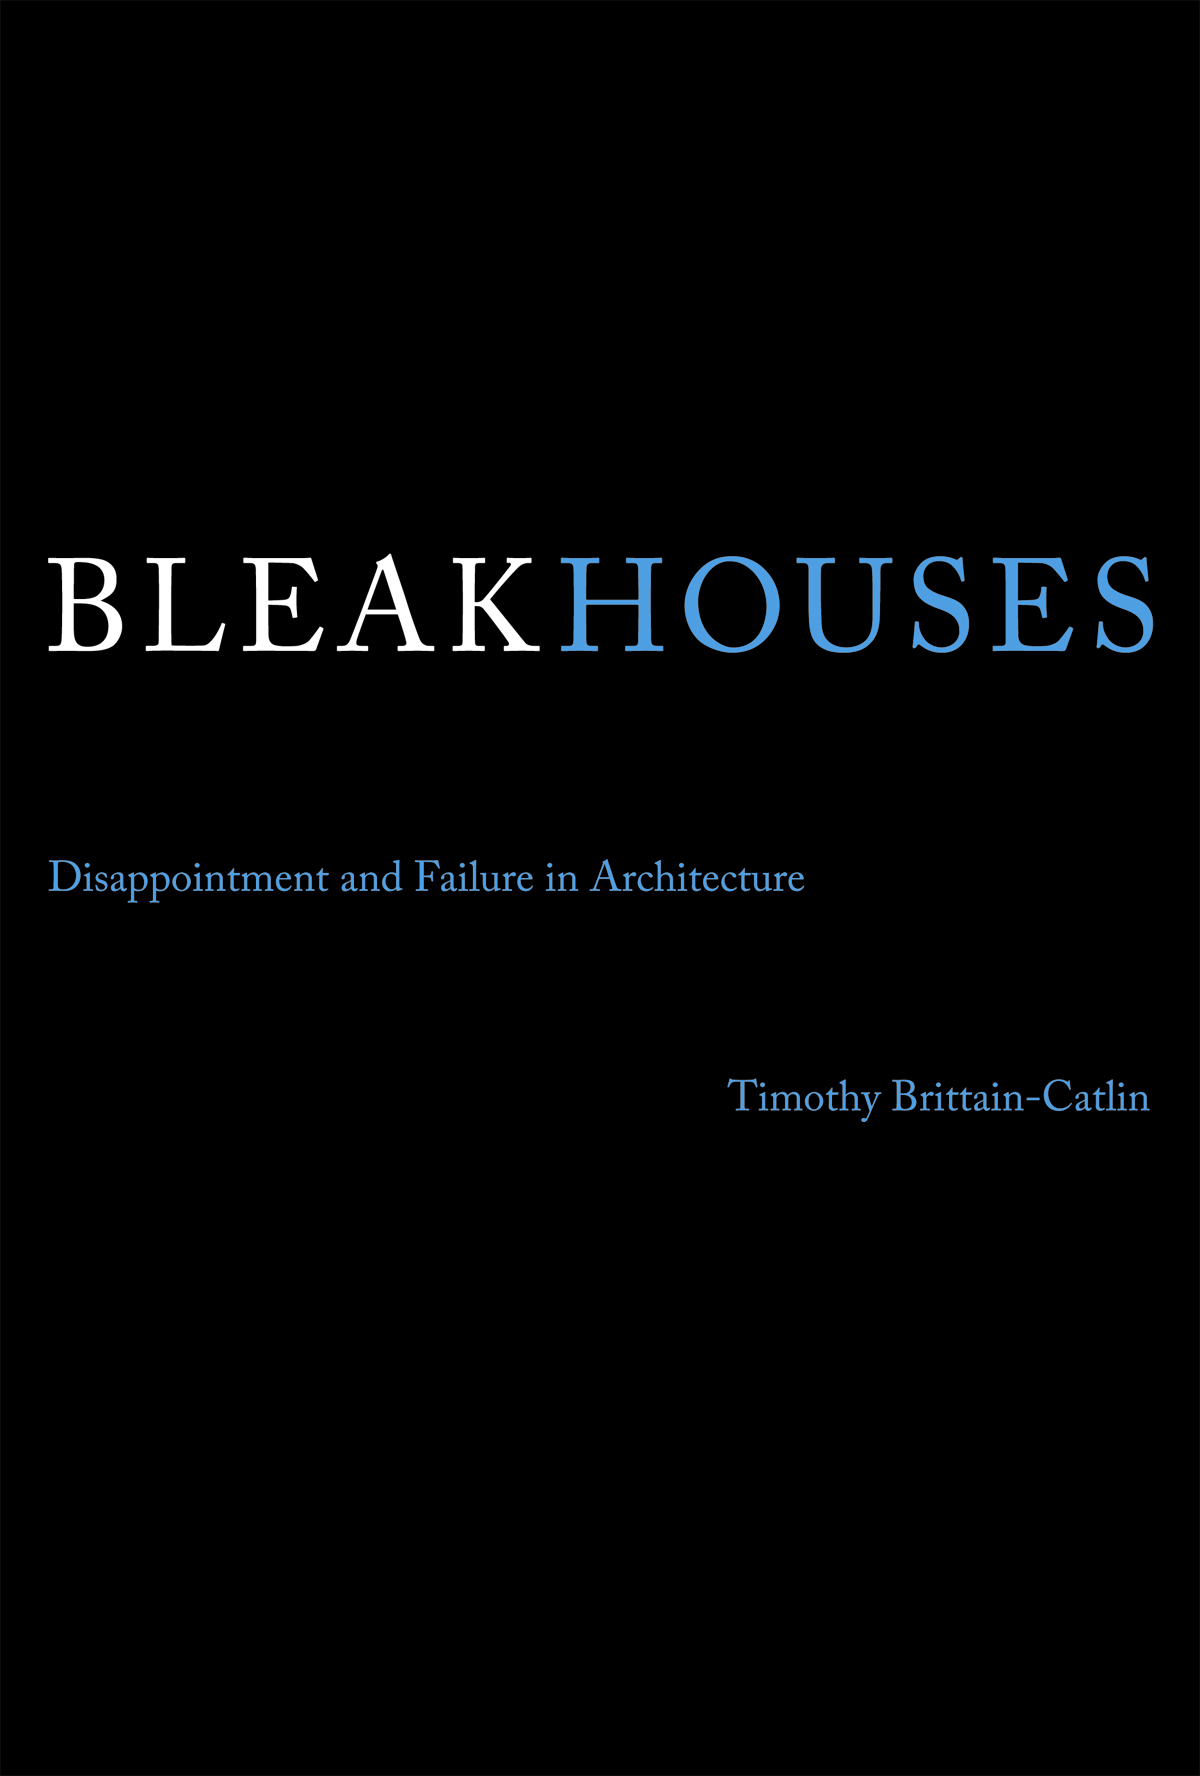 EPISODE 62 (MAY ’14): Timothy Brittain-Catlin